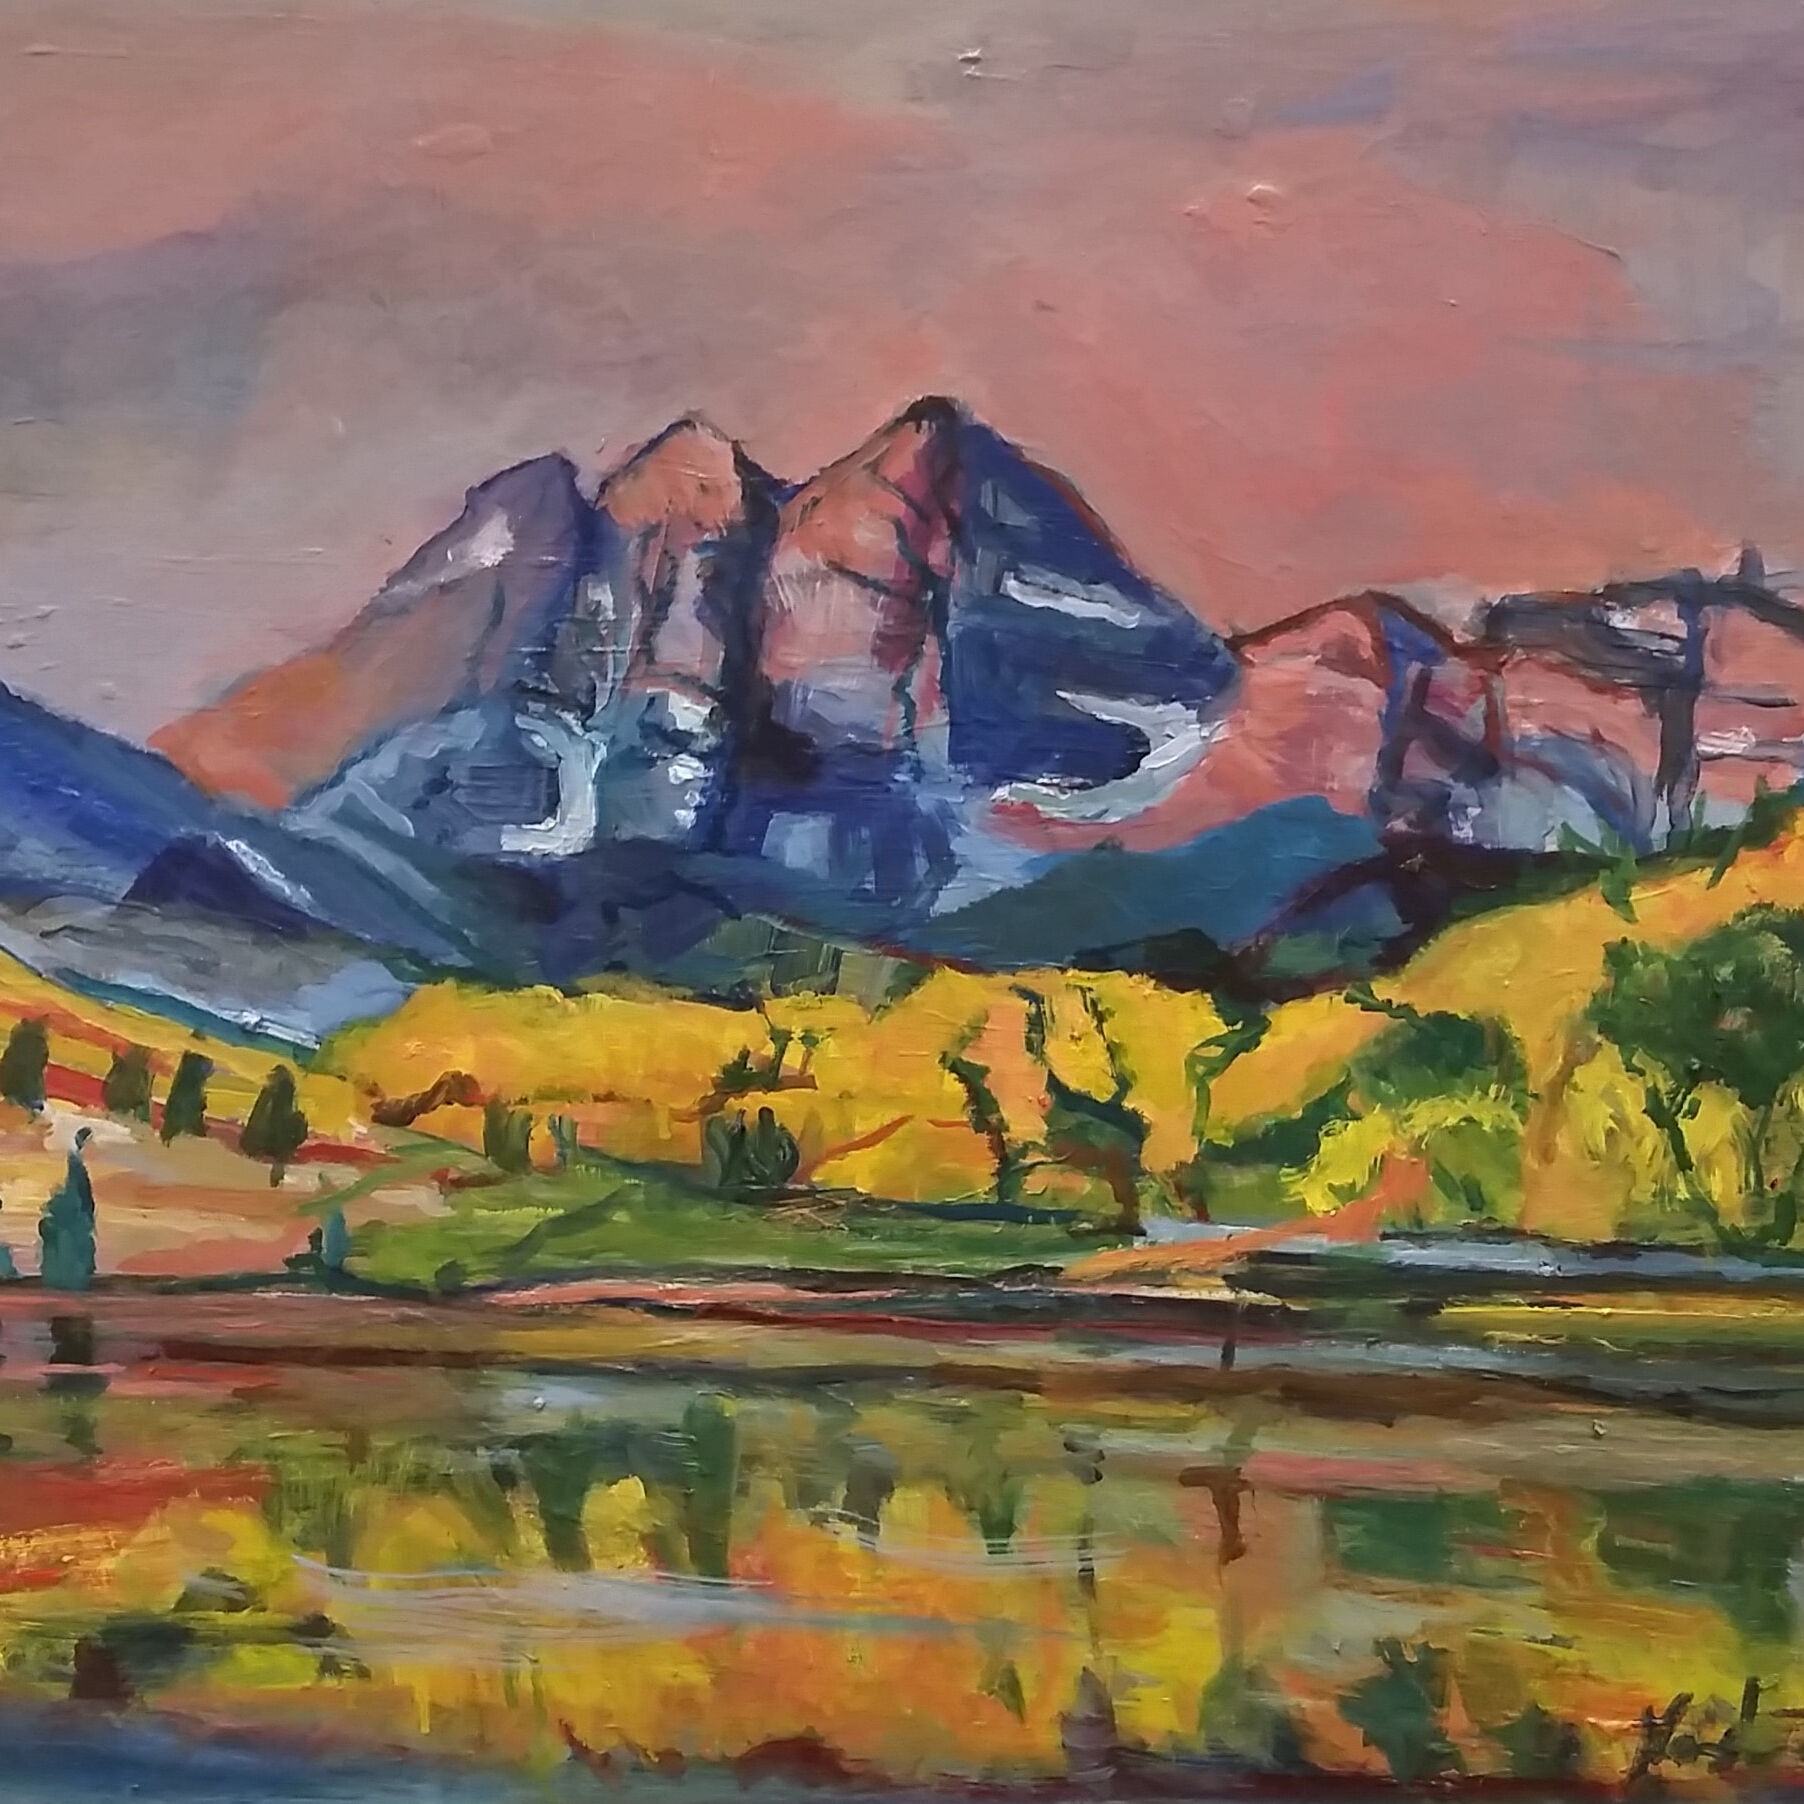 Nathan Moshinsky VAS—Canadian Autumn, Oil on Canvas Board, $1200_highly commended 2021